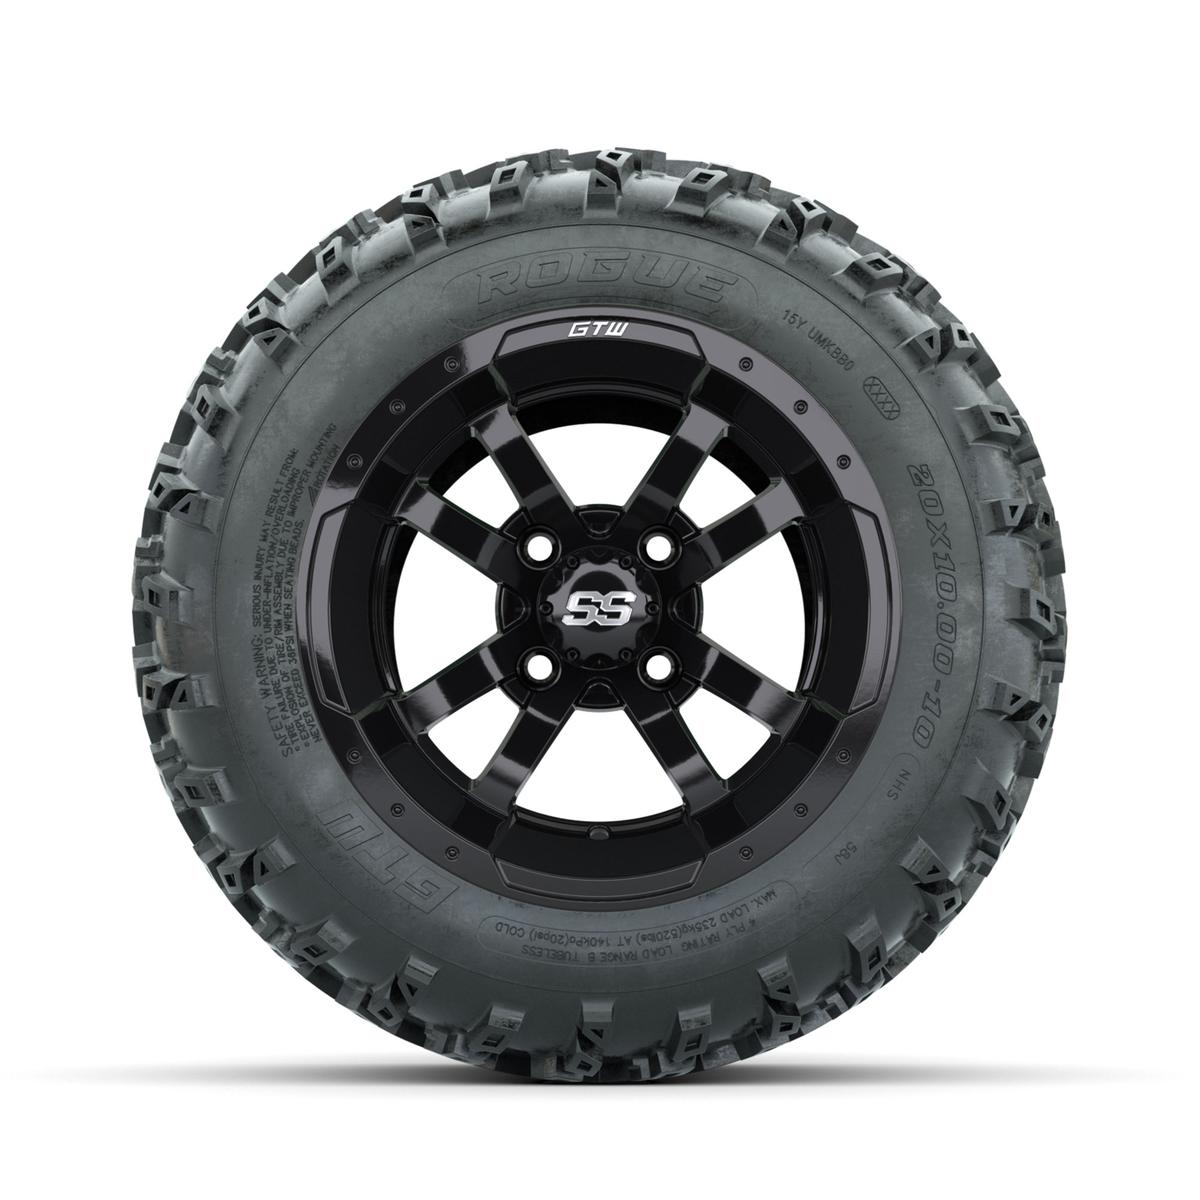 GTW Storm Trooper Black 10 in Wheels with 20x10.00-10 Rogue All Terrain Tires – Full Set